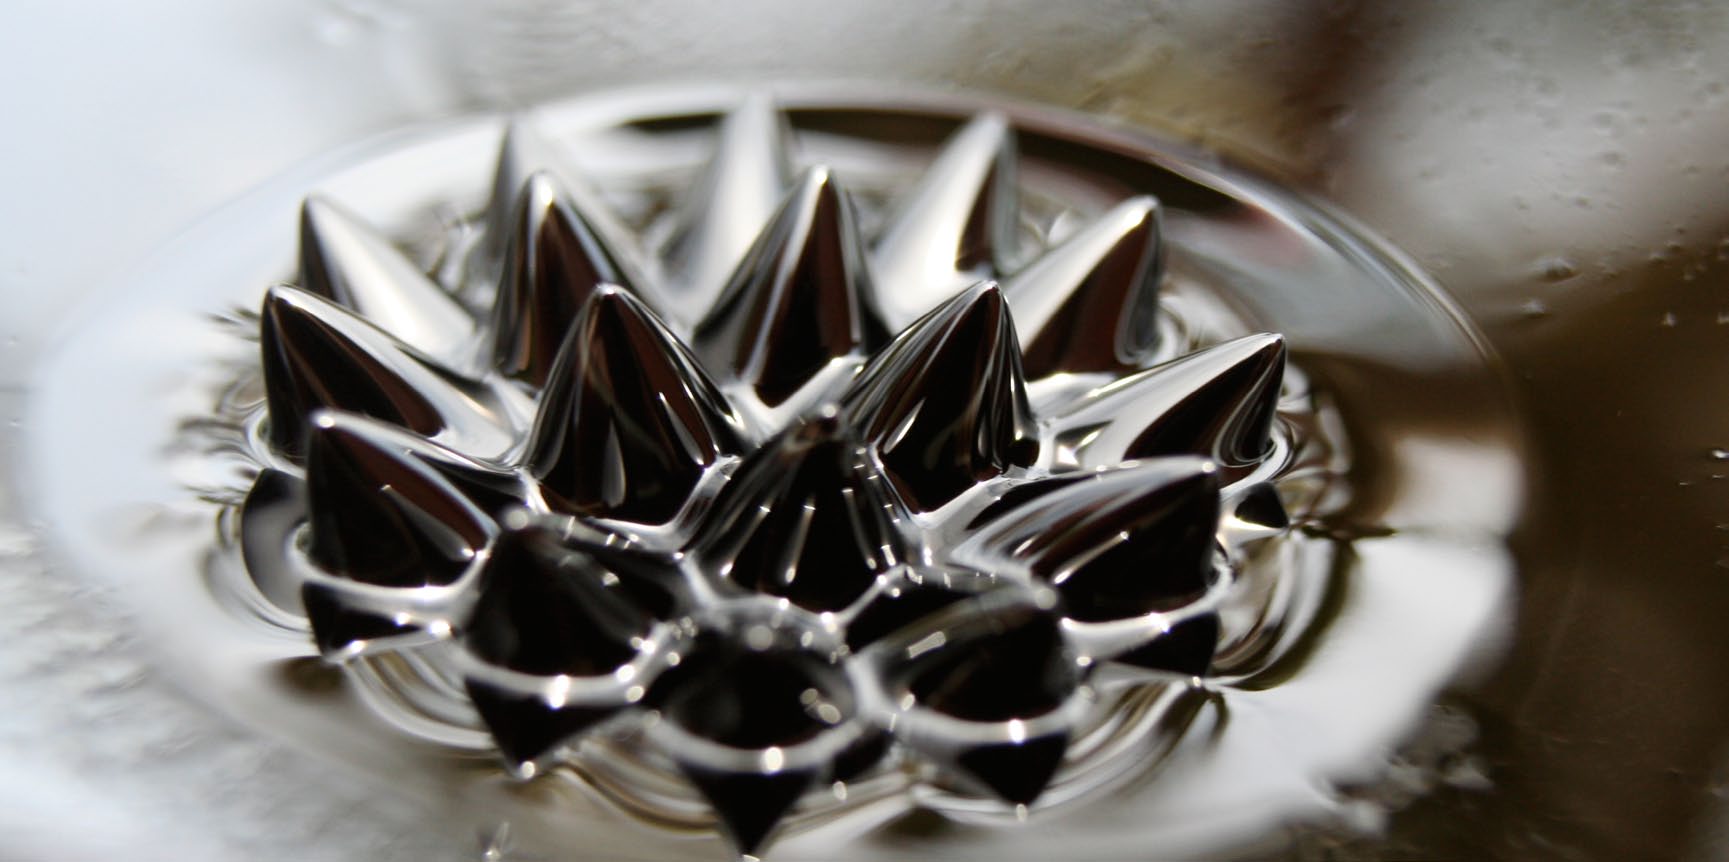 Ferrofluid is a liquid that acts like a magnet What s surprising about nanomaterials? When things are very, very small, they sometimes behave in different and surprising ways.